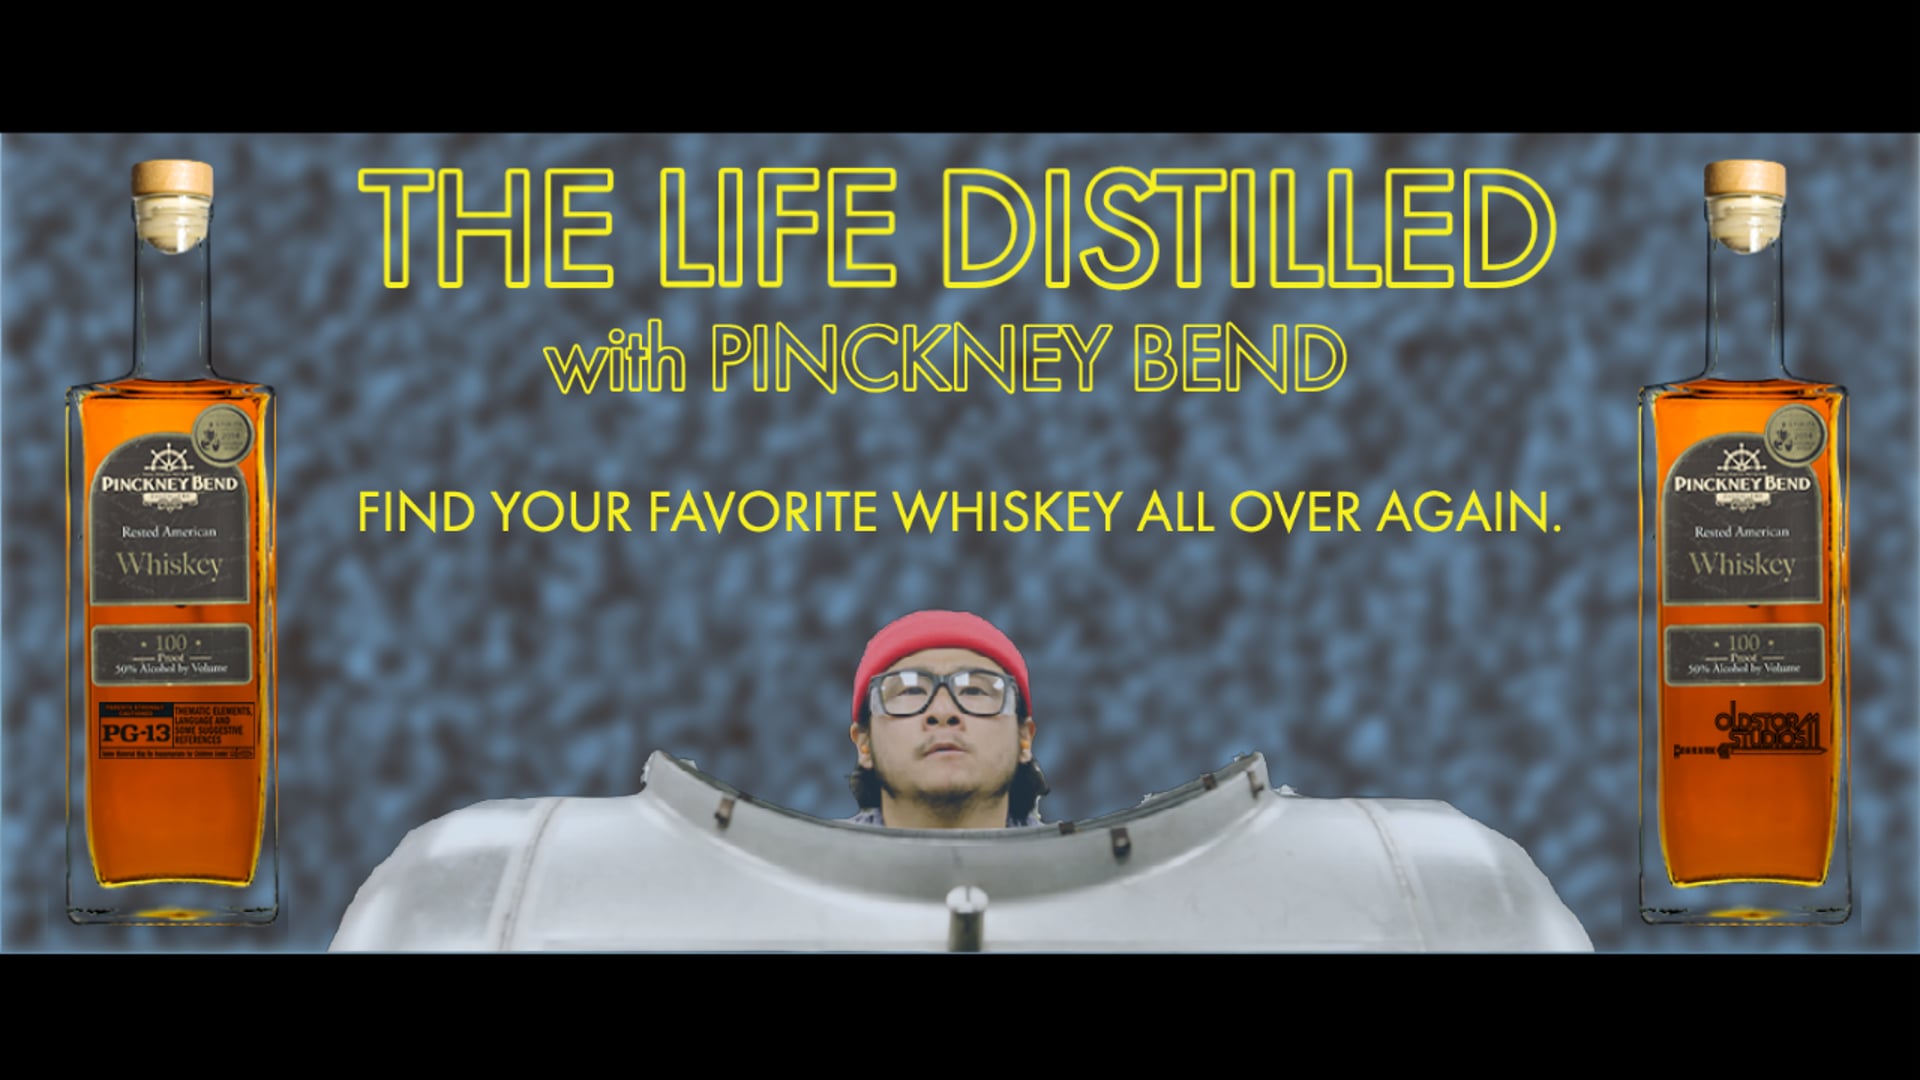 "The Life Distilled with Pinckney Bend" (Branded Whiskey Making Short Film)